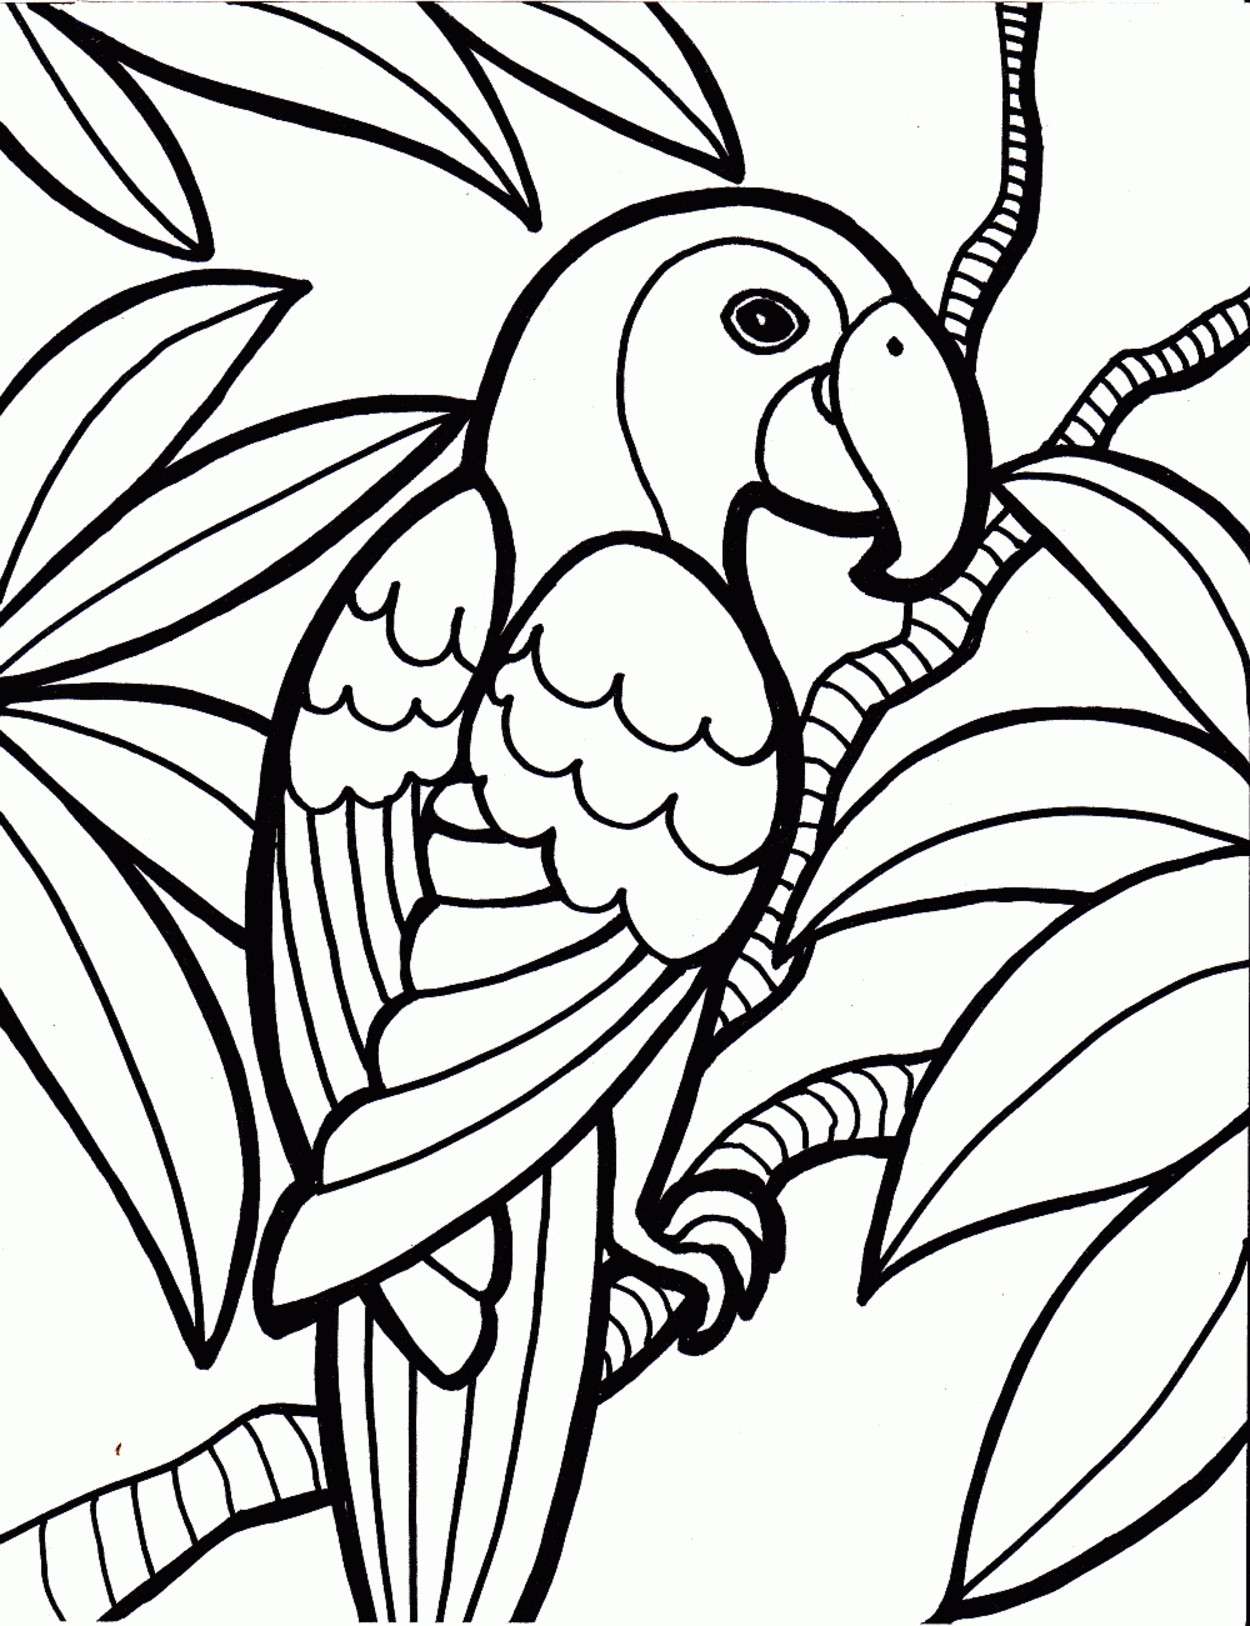 Bird Coloring Sheet
 Bird Coloring Page With Free Bird Coloring Pages